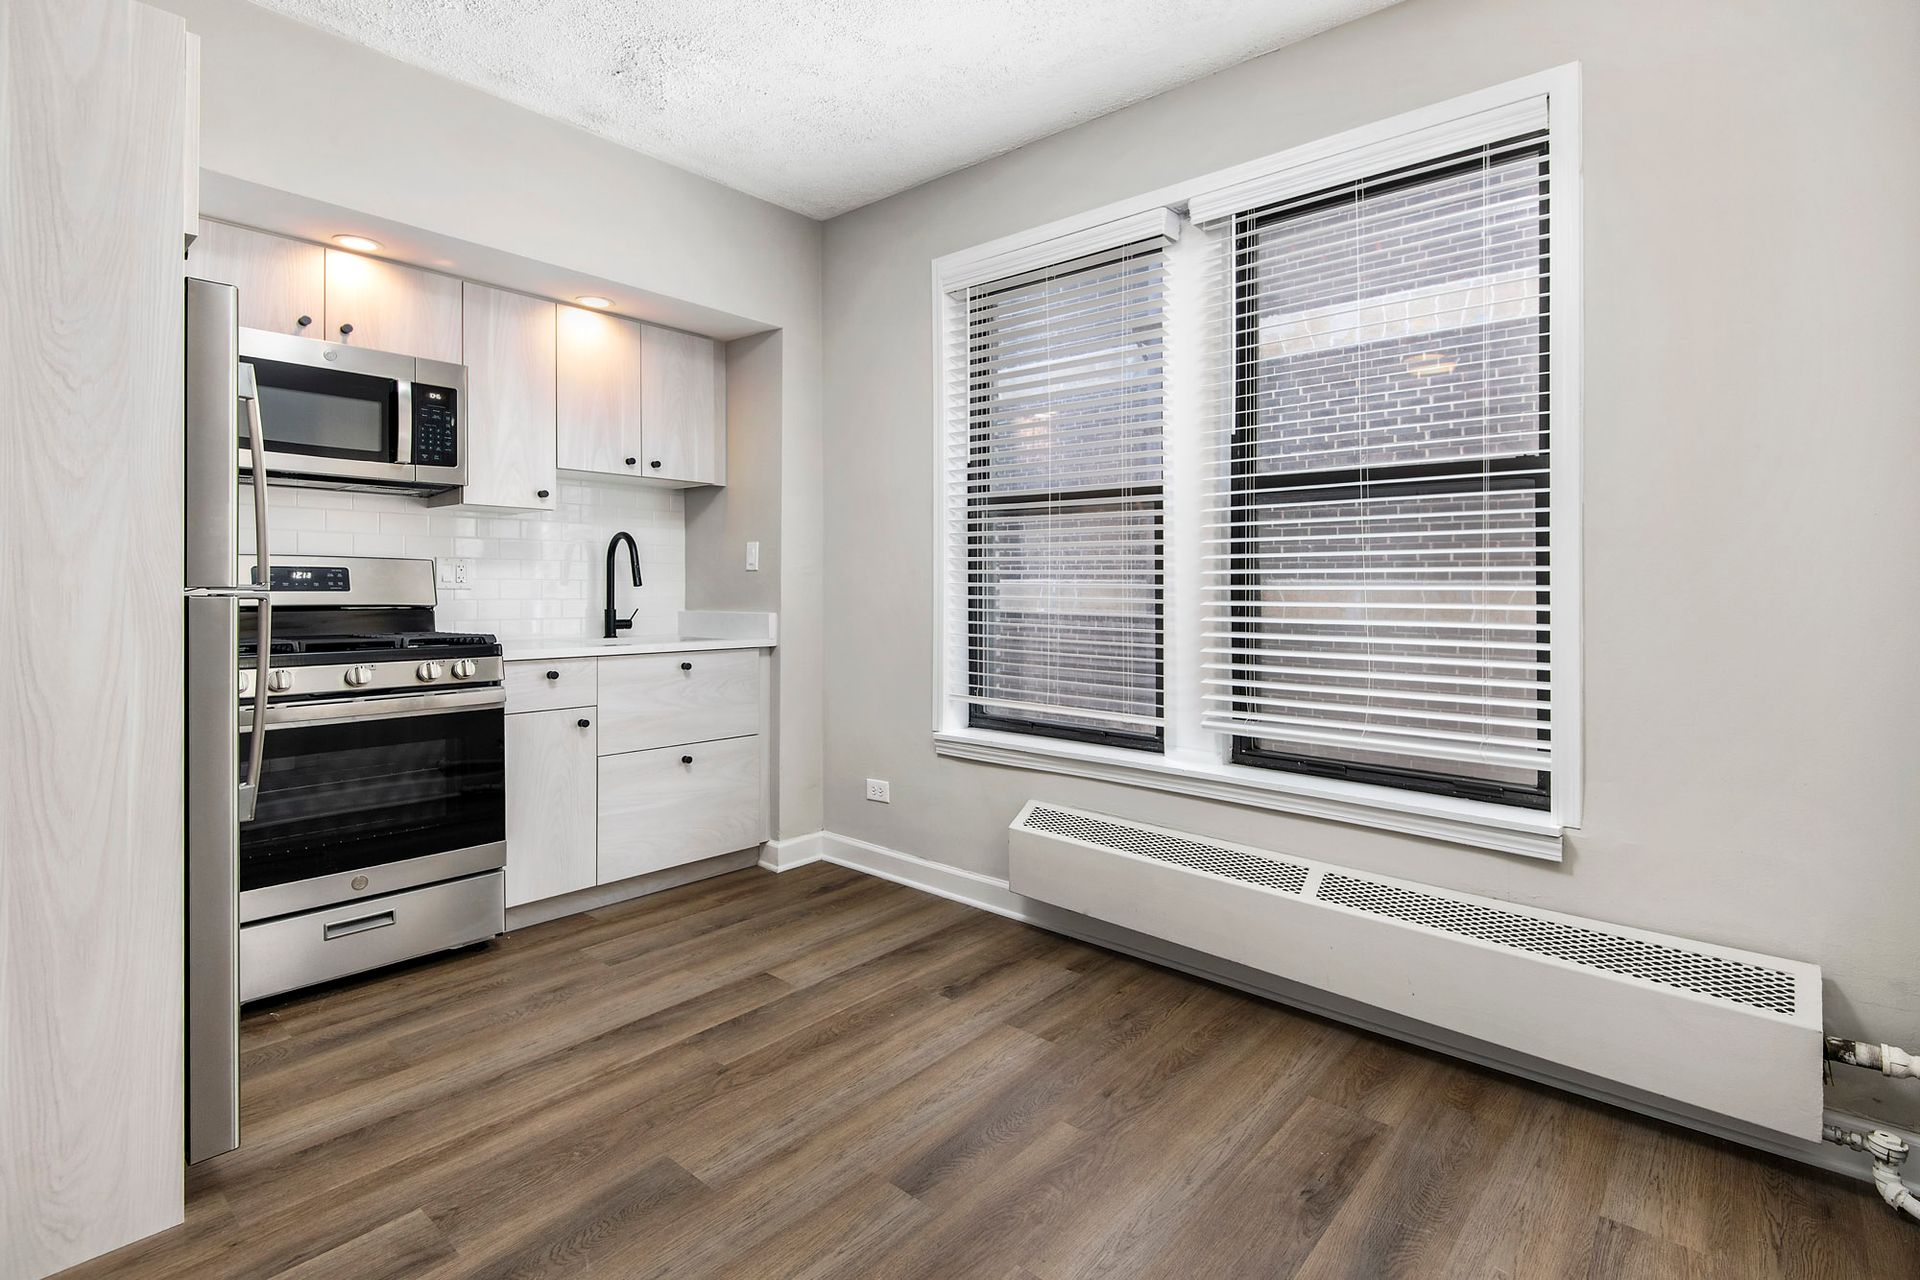 A kitchen with a refrigerator, stove, microwave, and two windows at Reside at Belmont Harbor. 